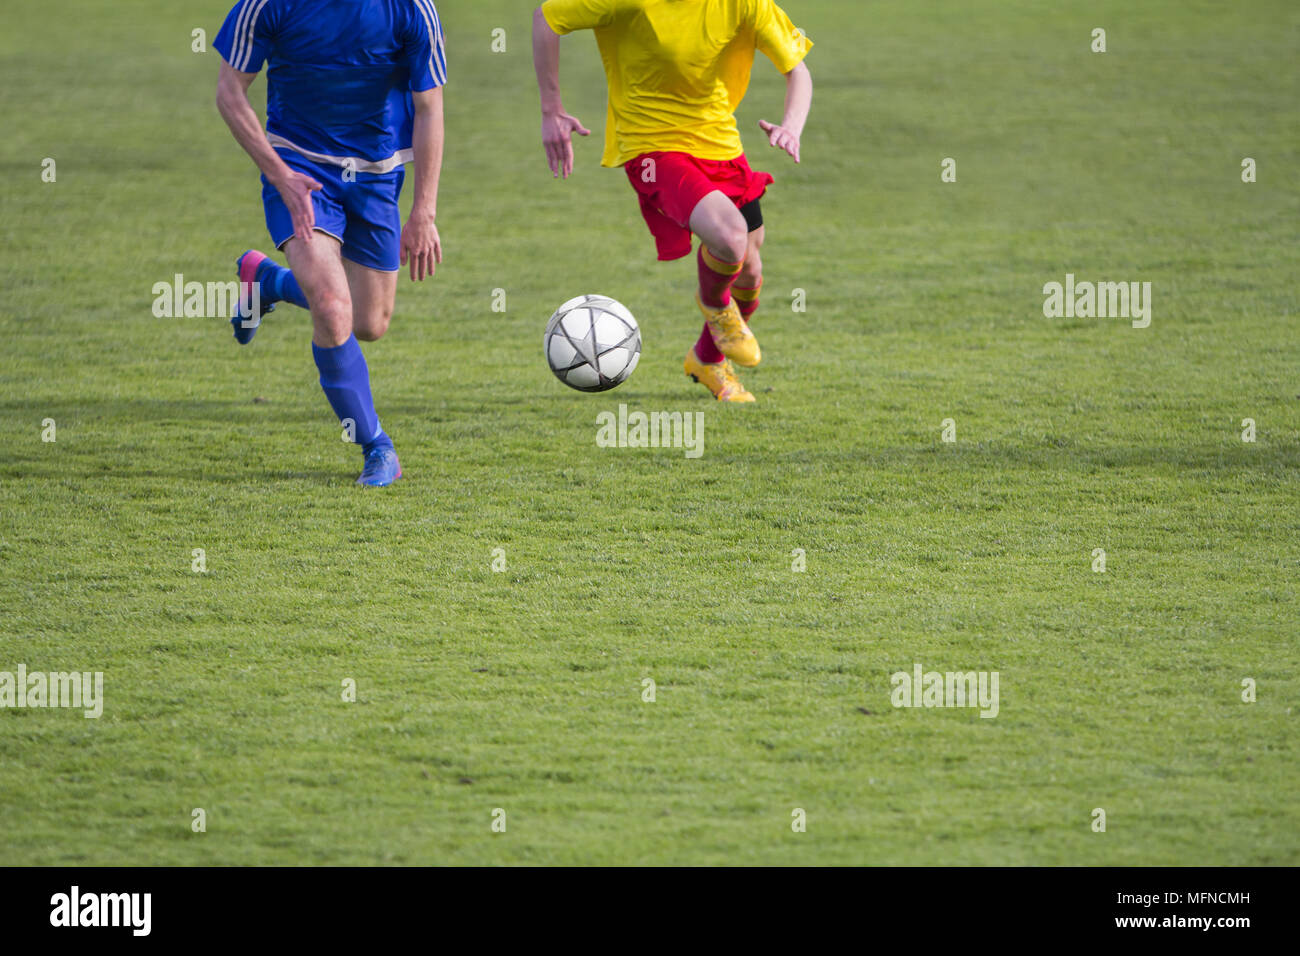 Football Soccer game Duel Drill Dribbling Stock Photo